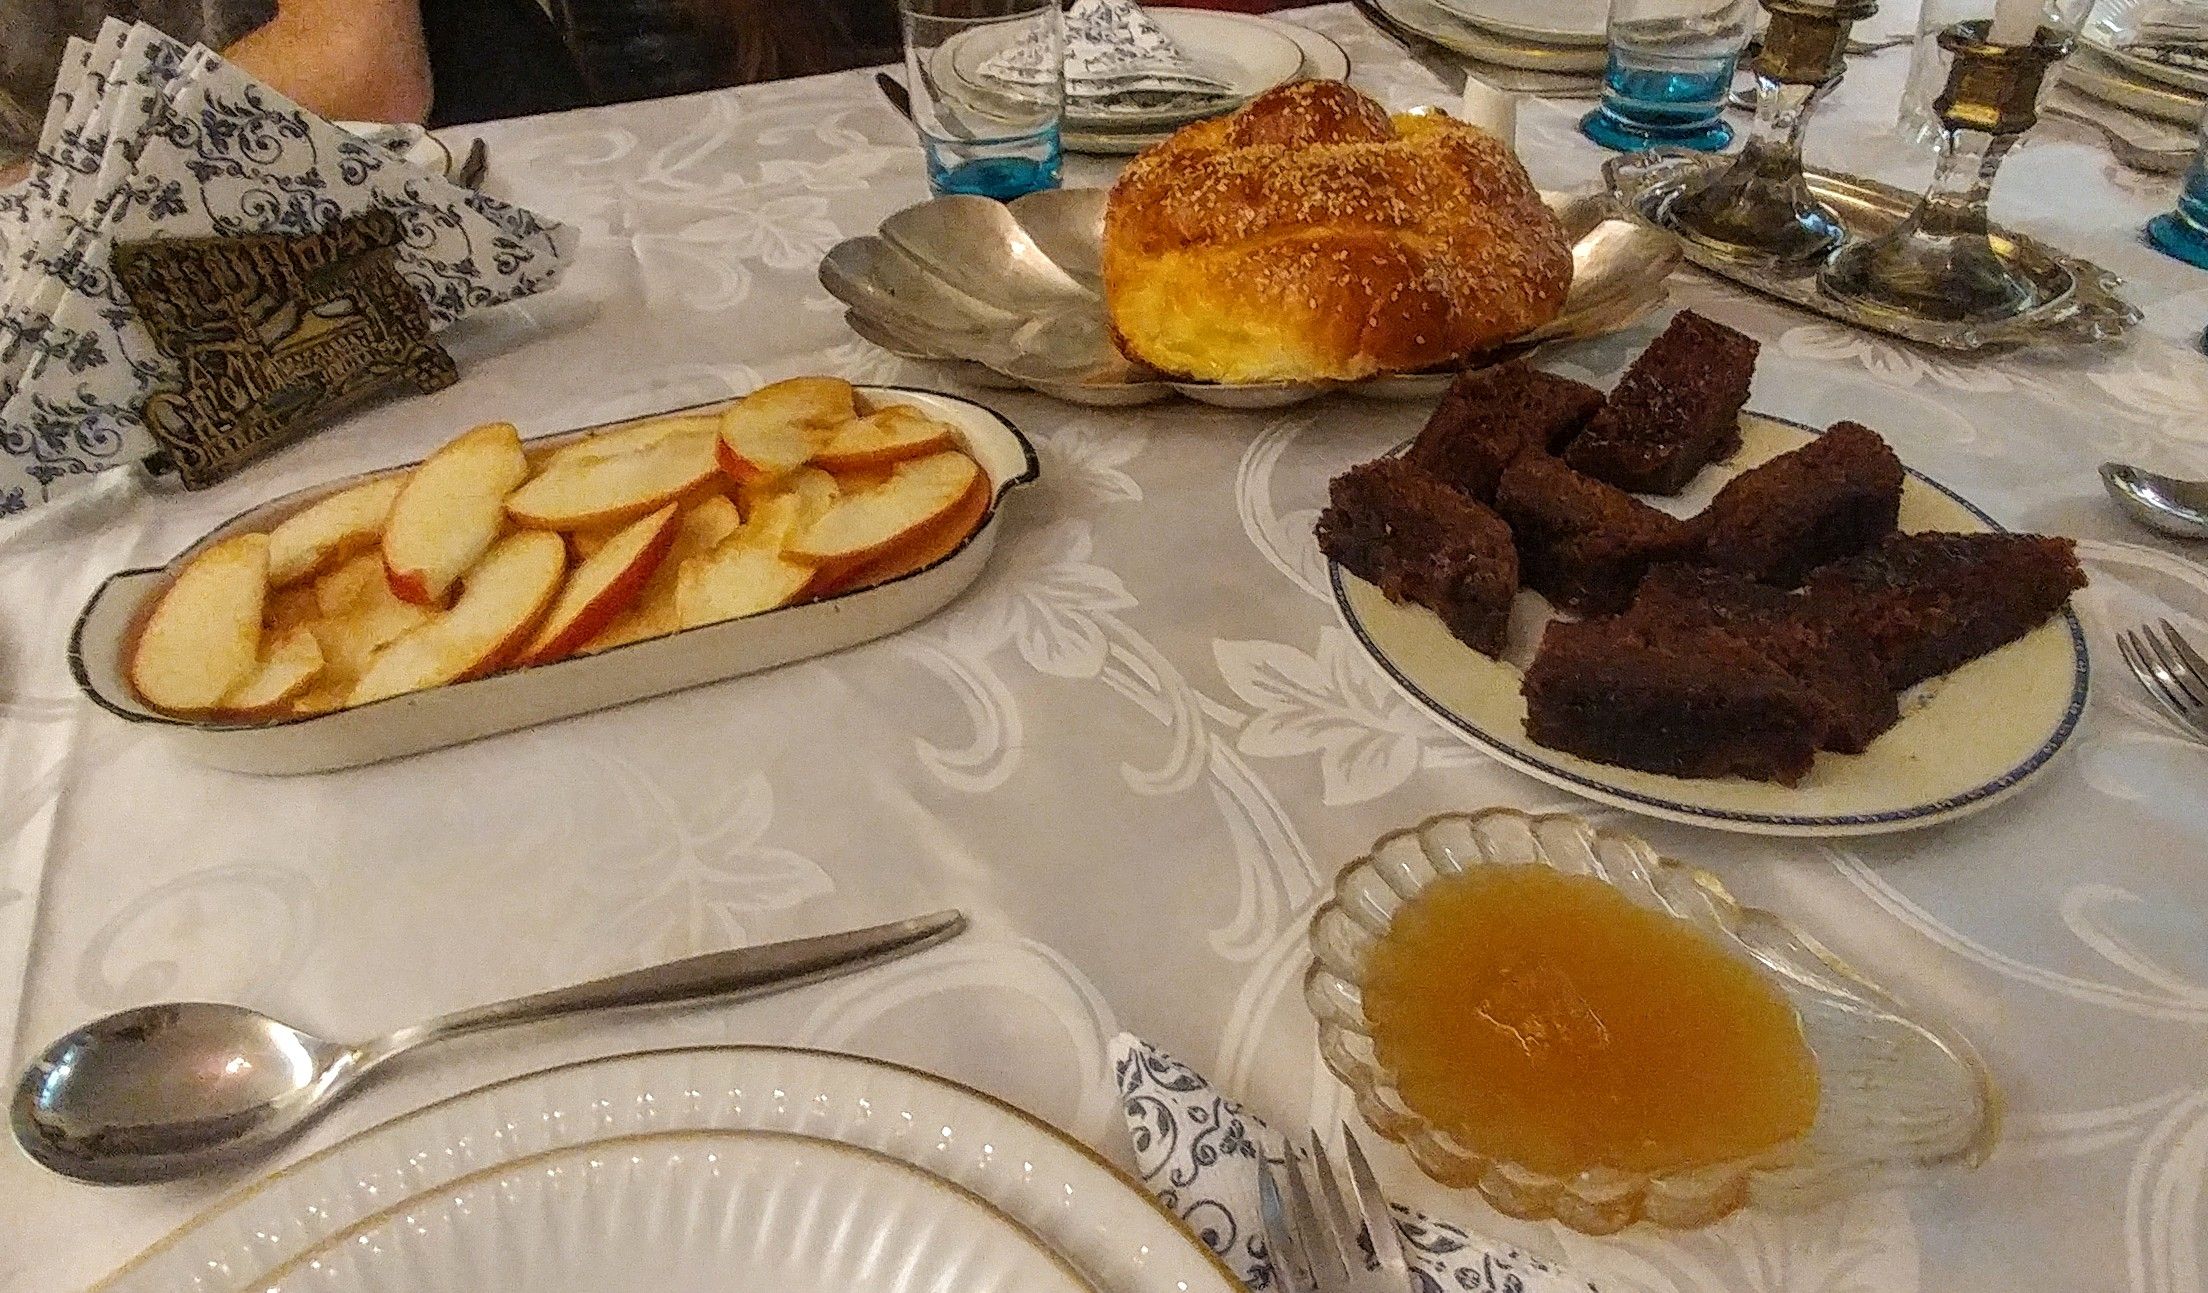 Caption: Dishes with sliced apples, honey, a round challah and slices of lekach